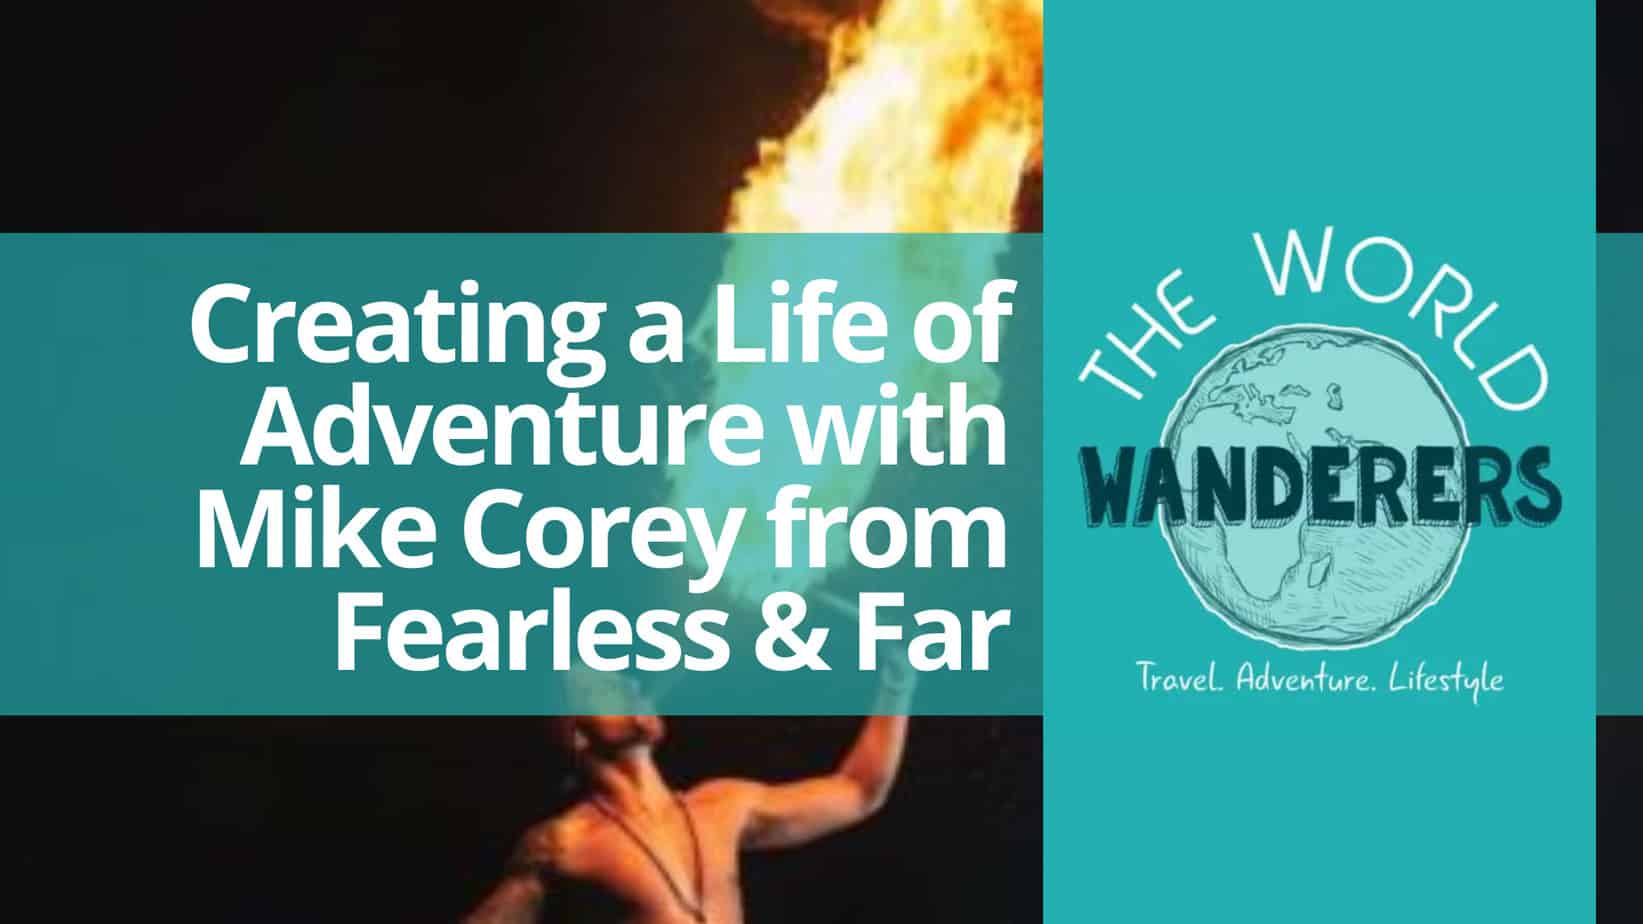 Creating a Life of Adventure with Mike Corey from Fearless & Far